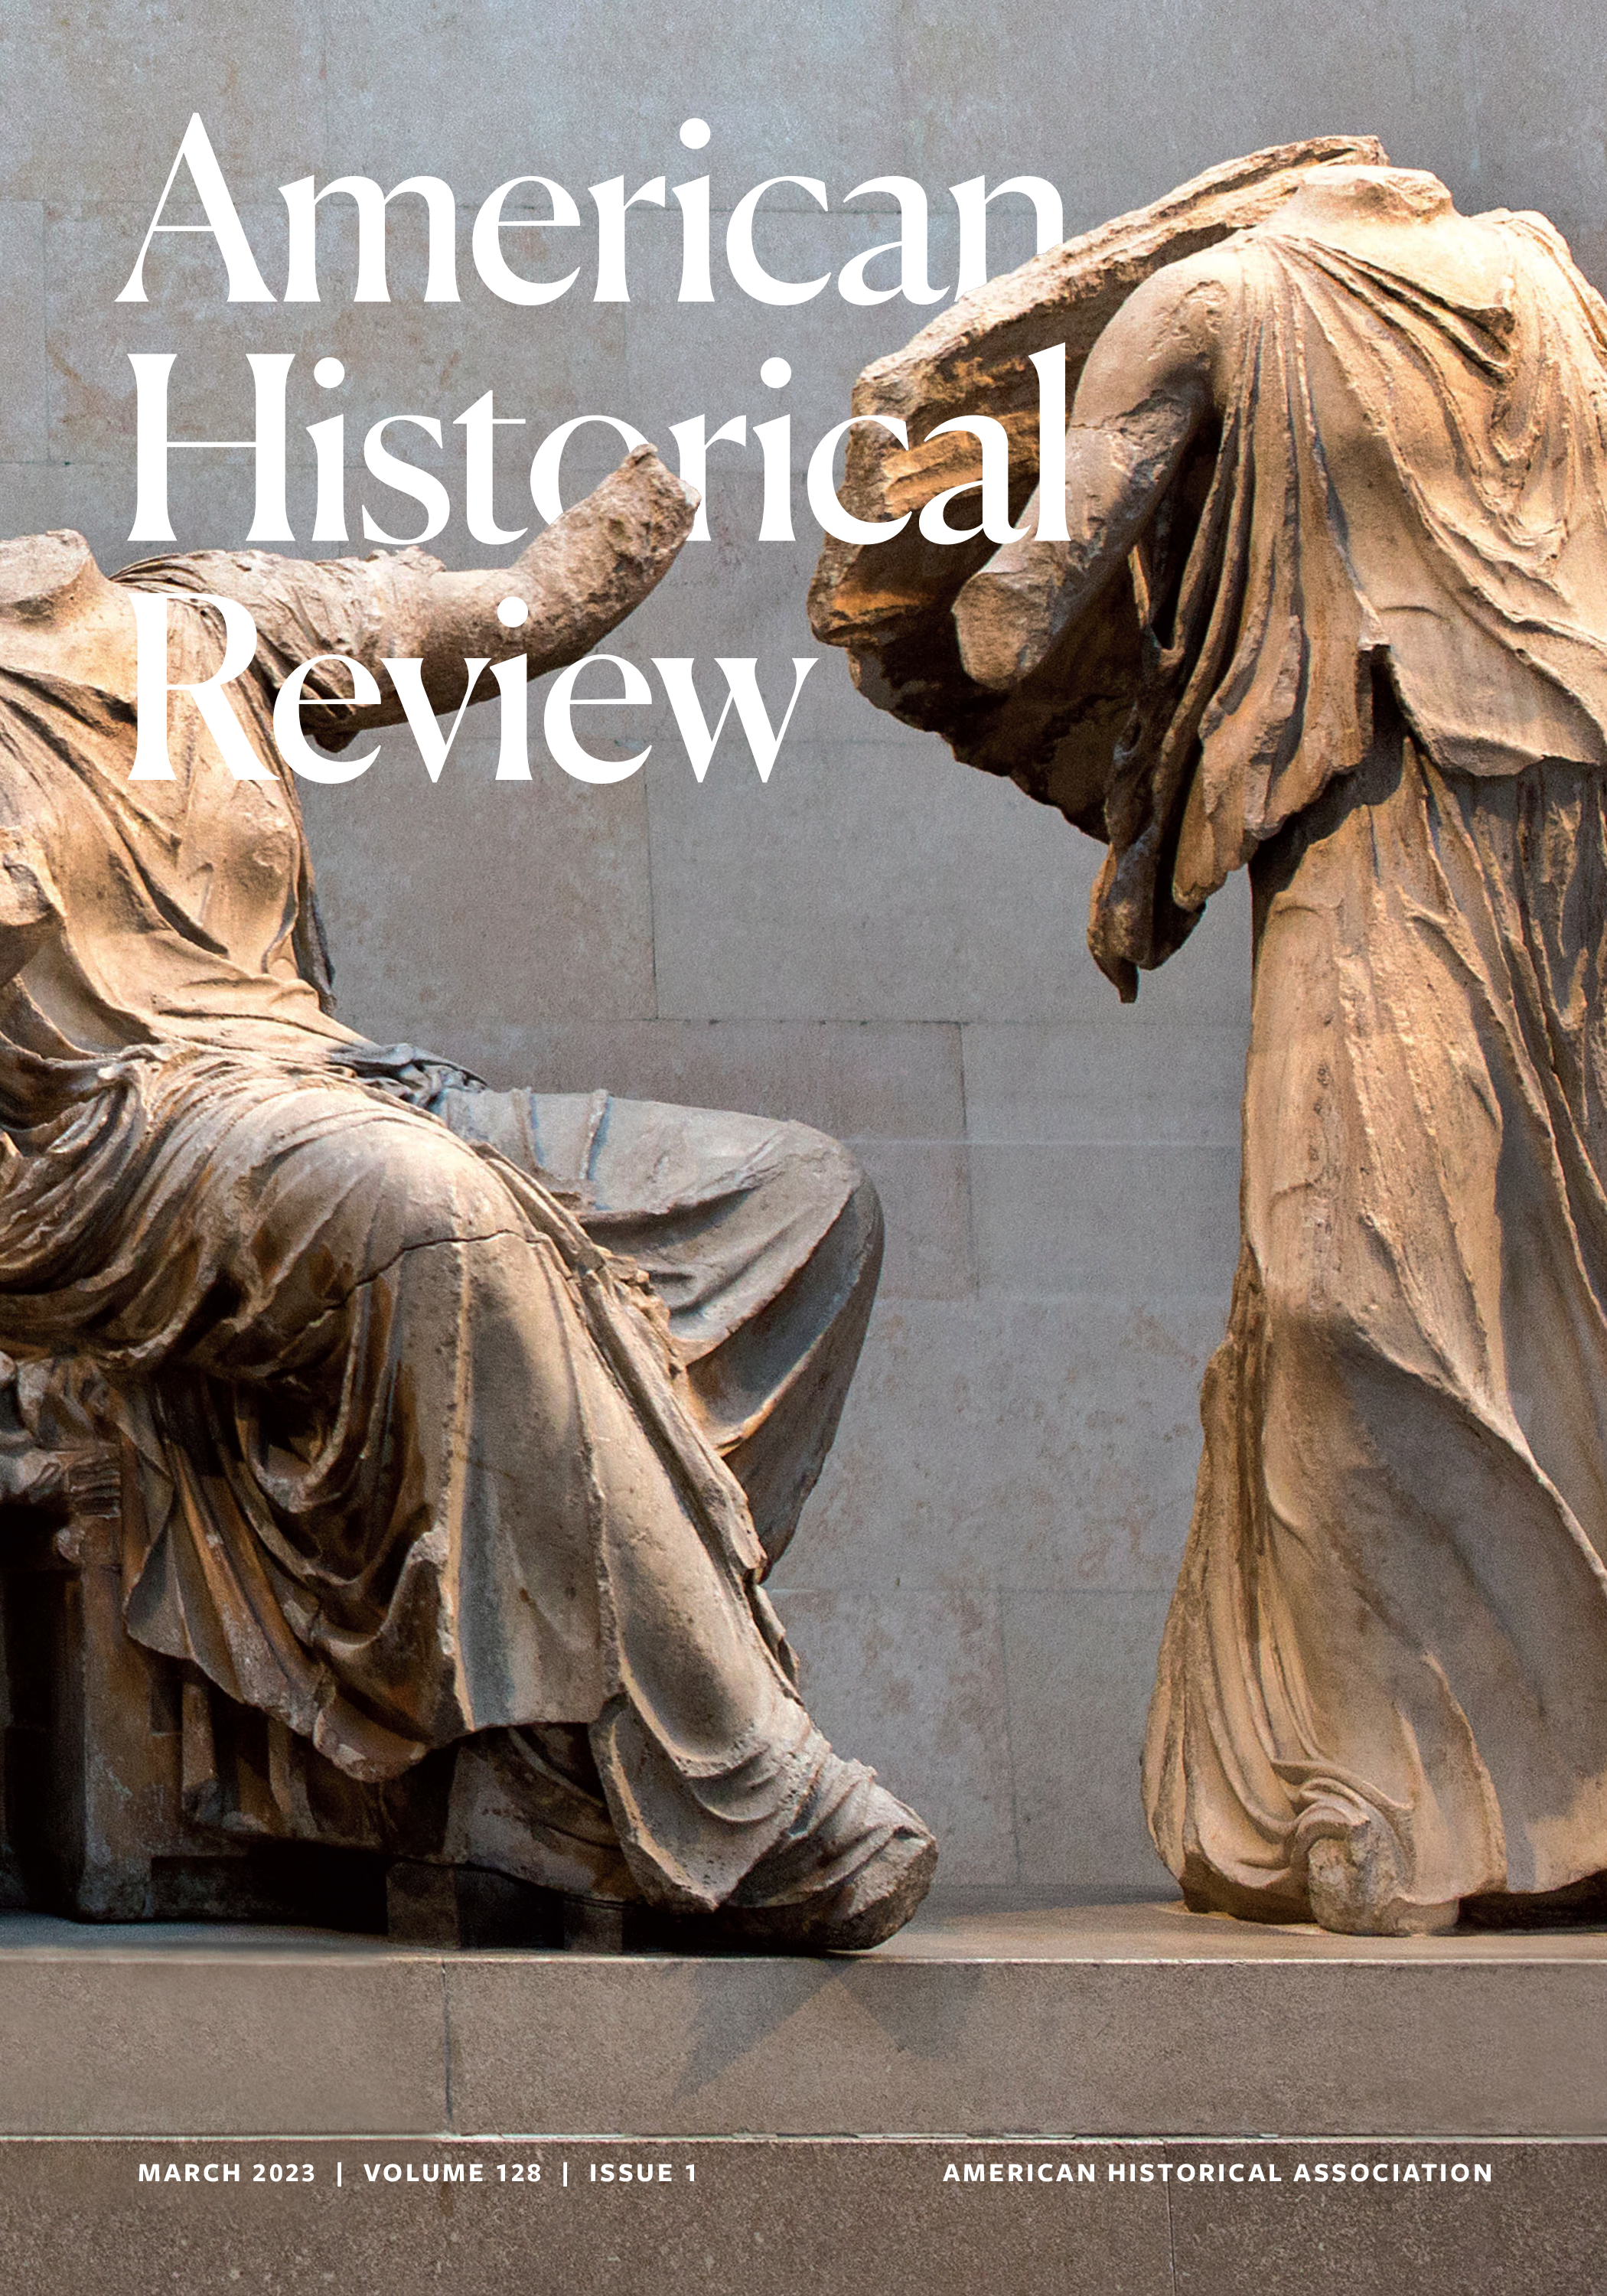 Cover of the March 2023 issue of the American Historical Review